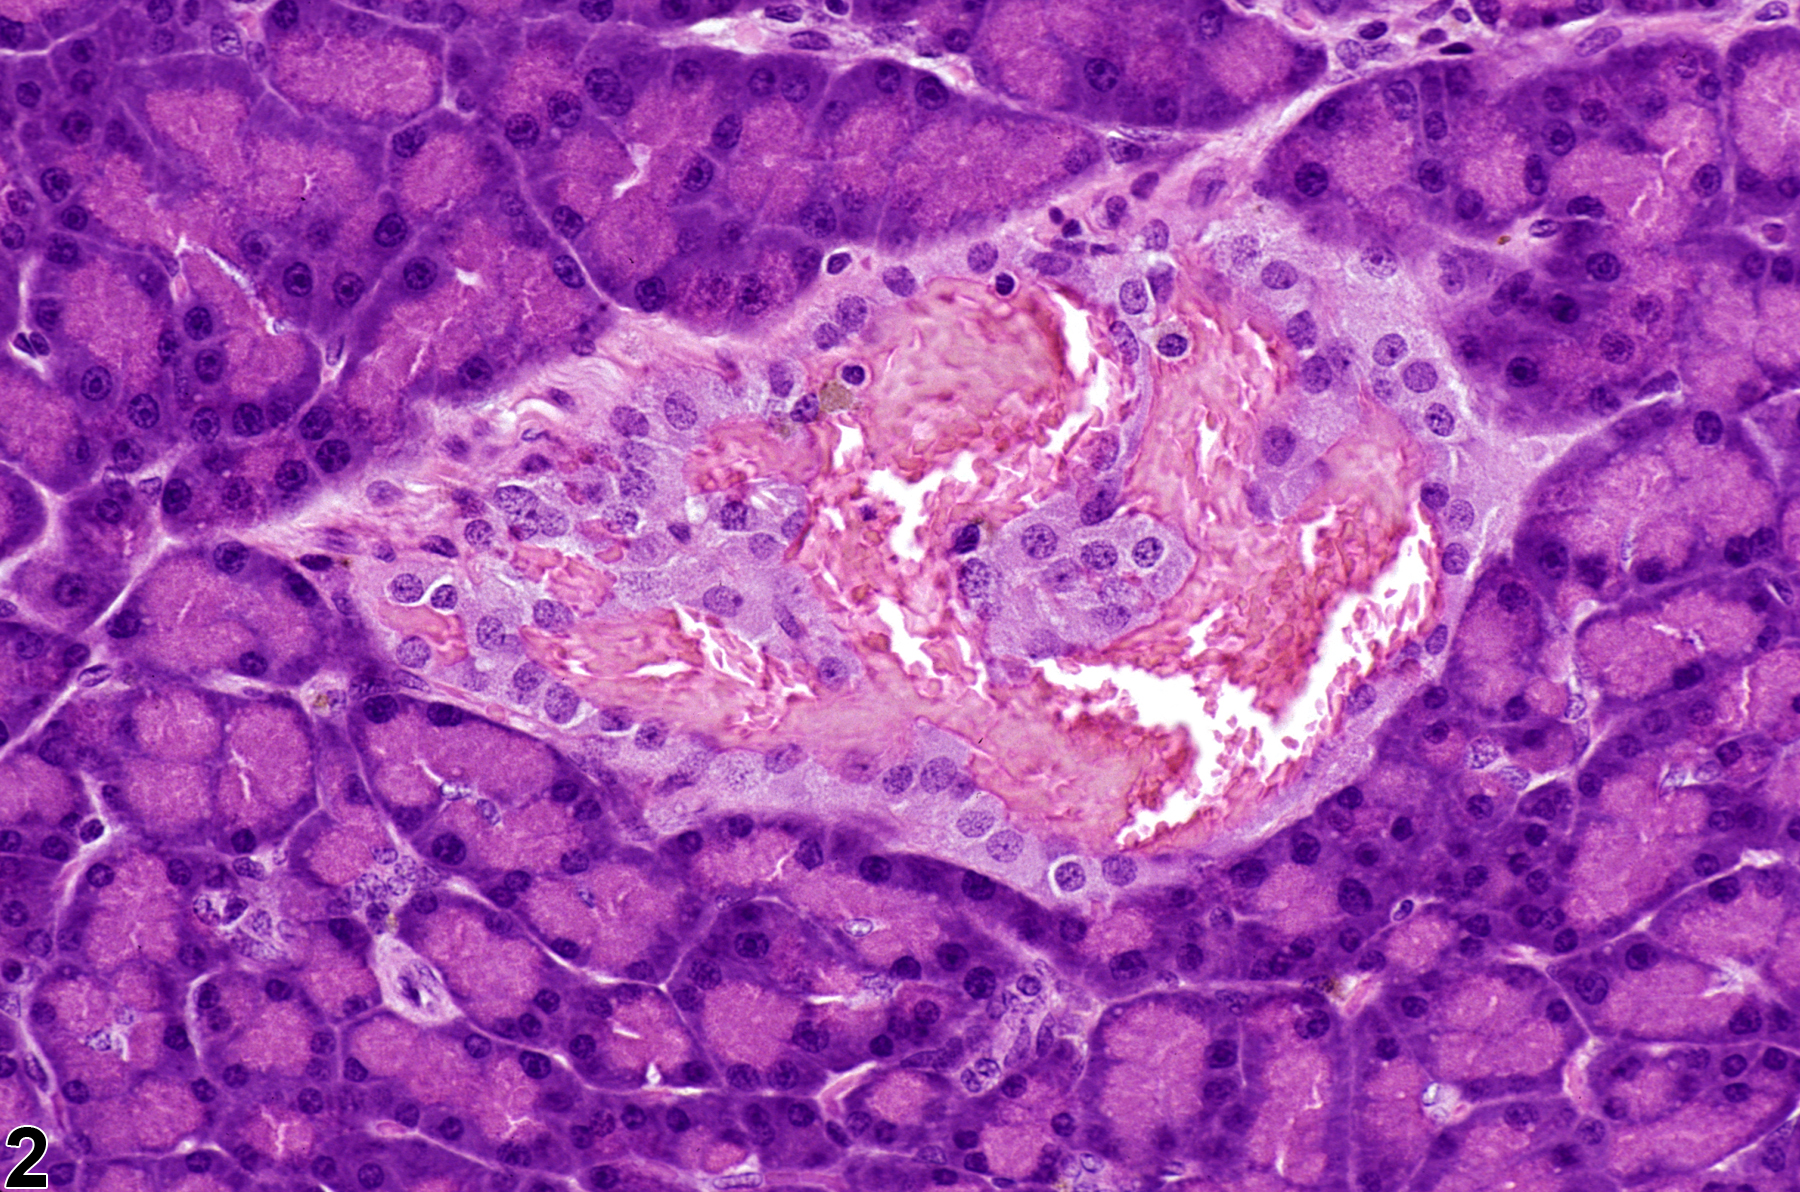 Image of angiectasis in the pancreatic islet from a male F344/N rat in a chronic study